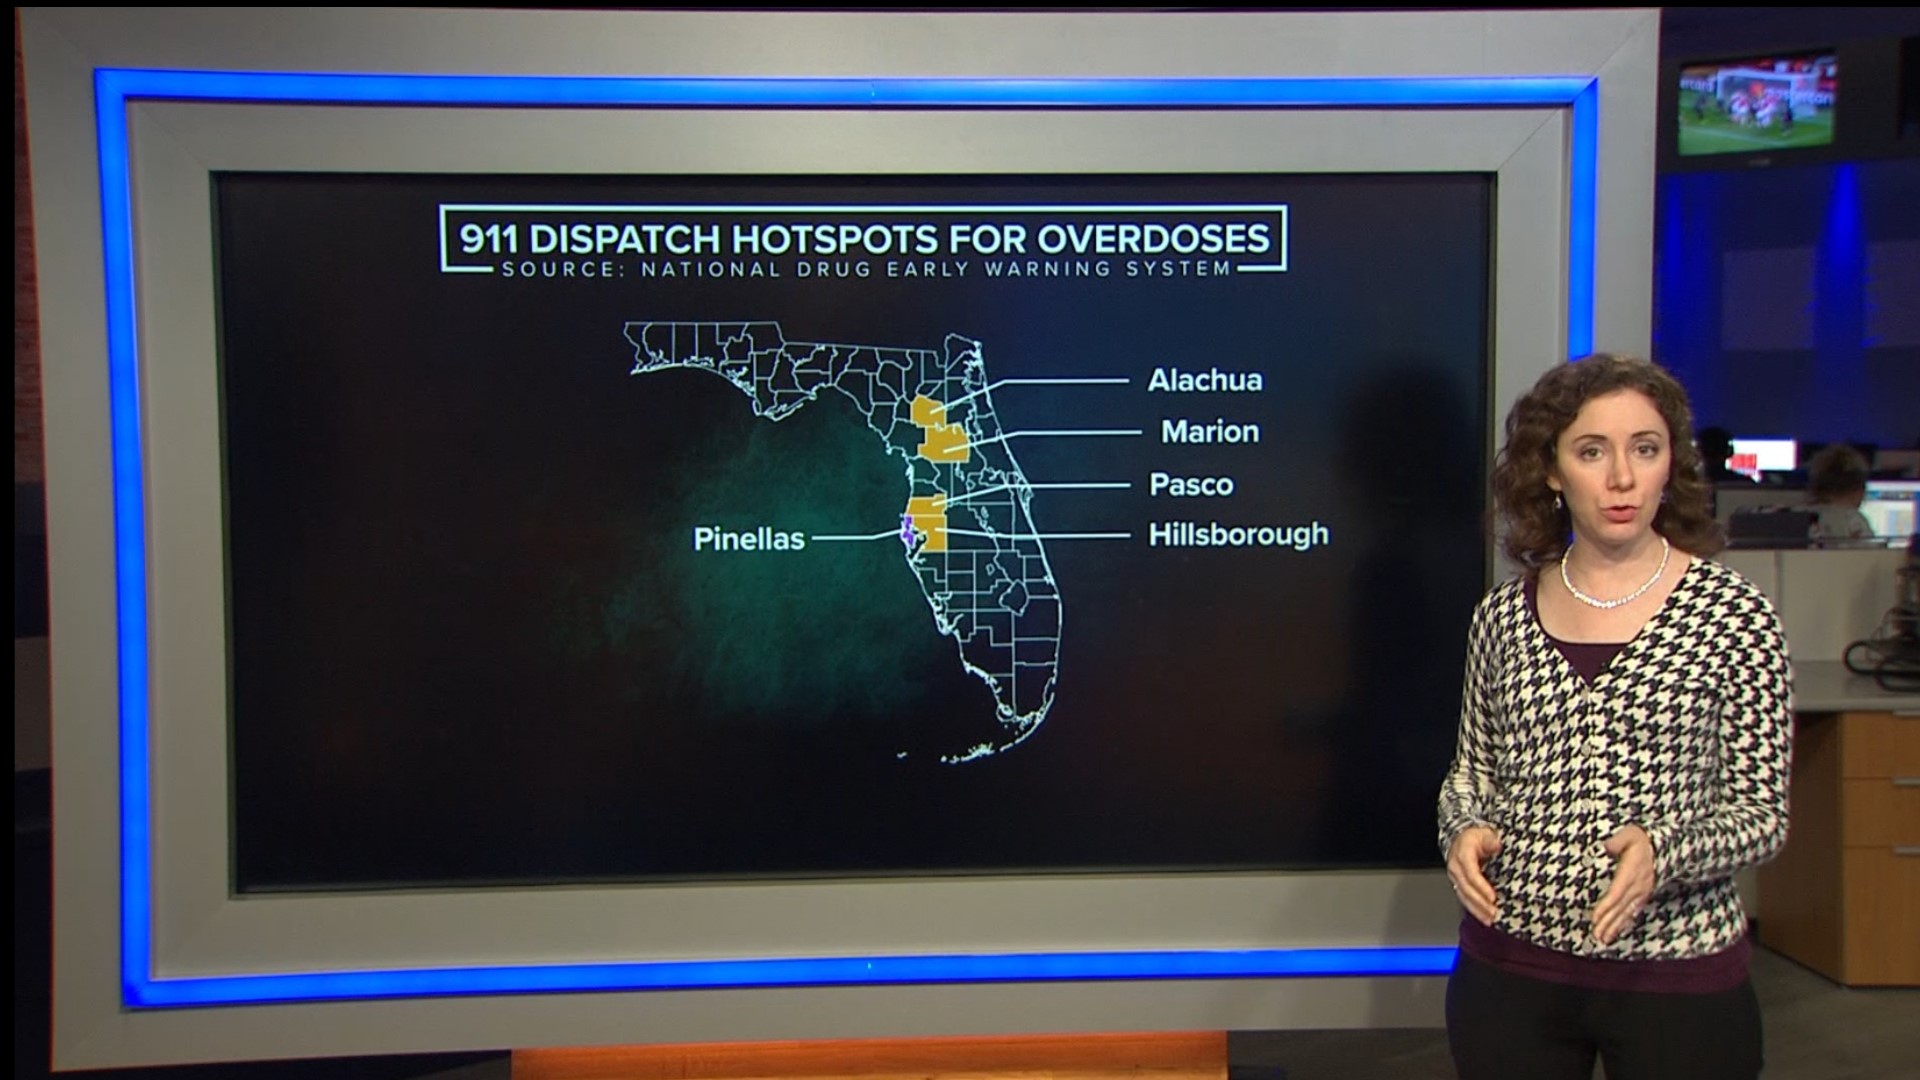 Three out of the five Florida counties lighting up as overdose dispatch “hotspots” are in the Tampa Bay area, according to the National Drug Early Warning System.